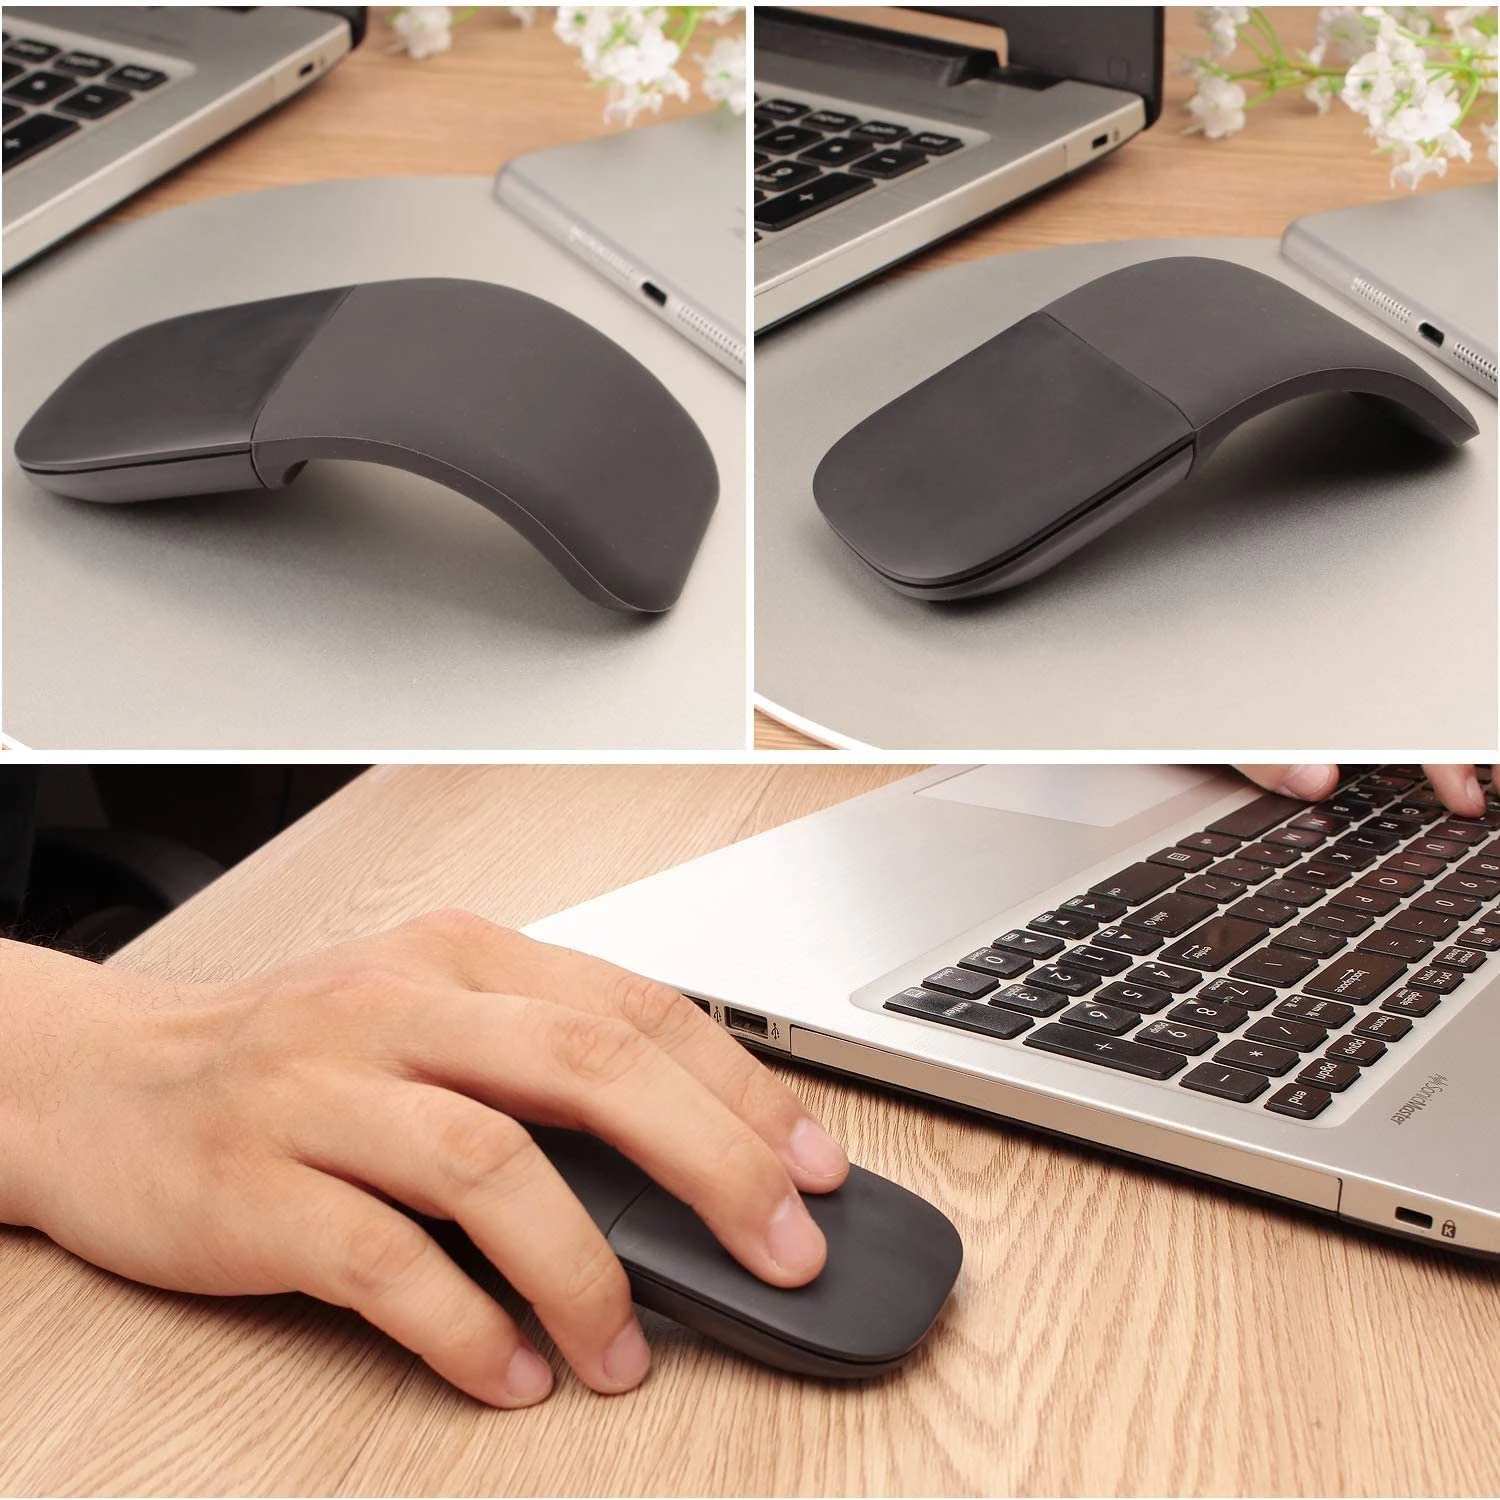 

Bluetooth Arc Touch Mouse Portable Wireless Foldable Silent Mouse Slim Mini Computer Optical Mice for Laptop Tablet Mac iPad